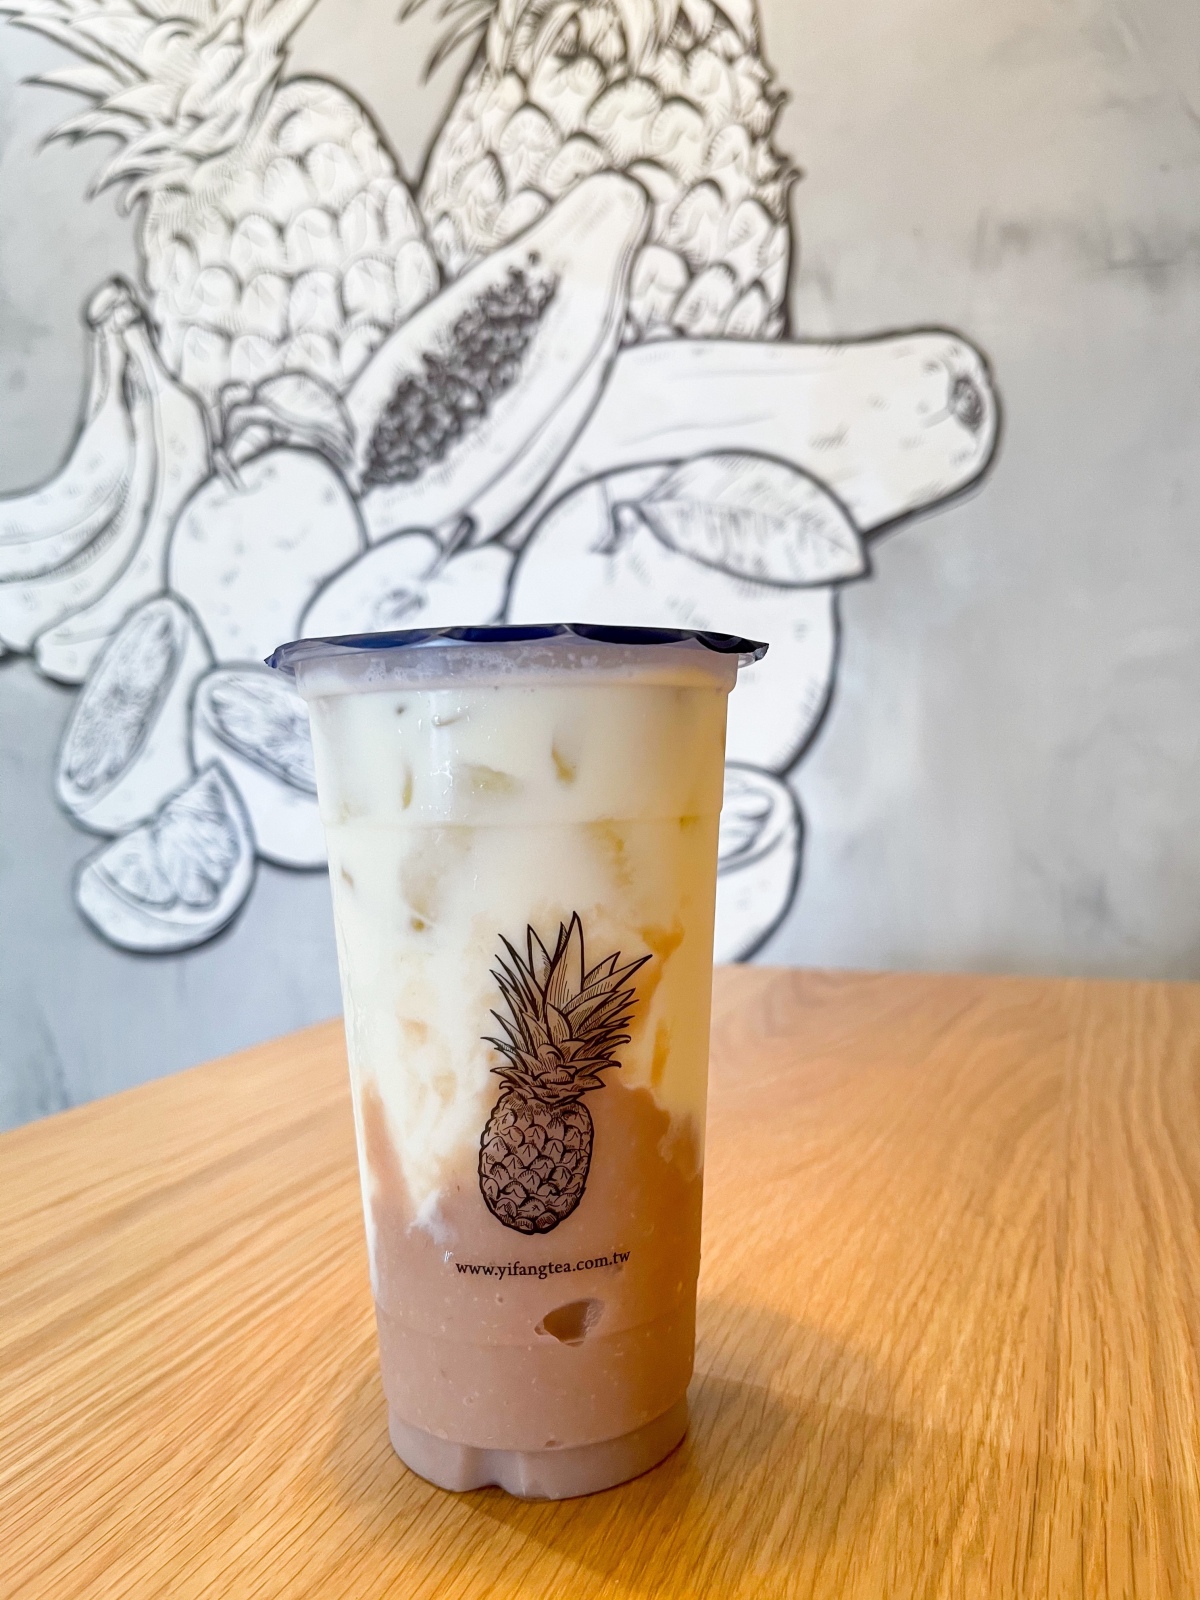 Guide: DMV Boba Tea Shops You Need To Try Next